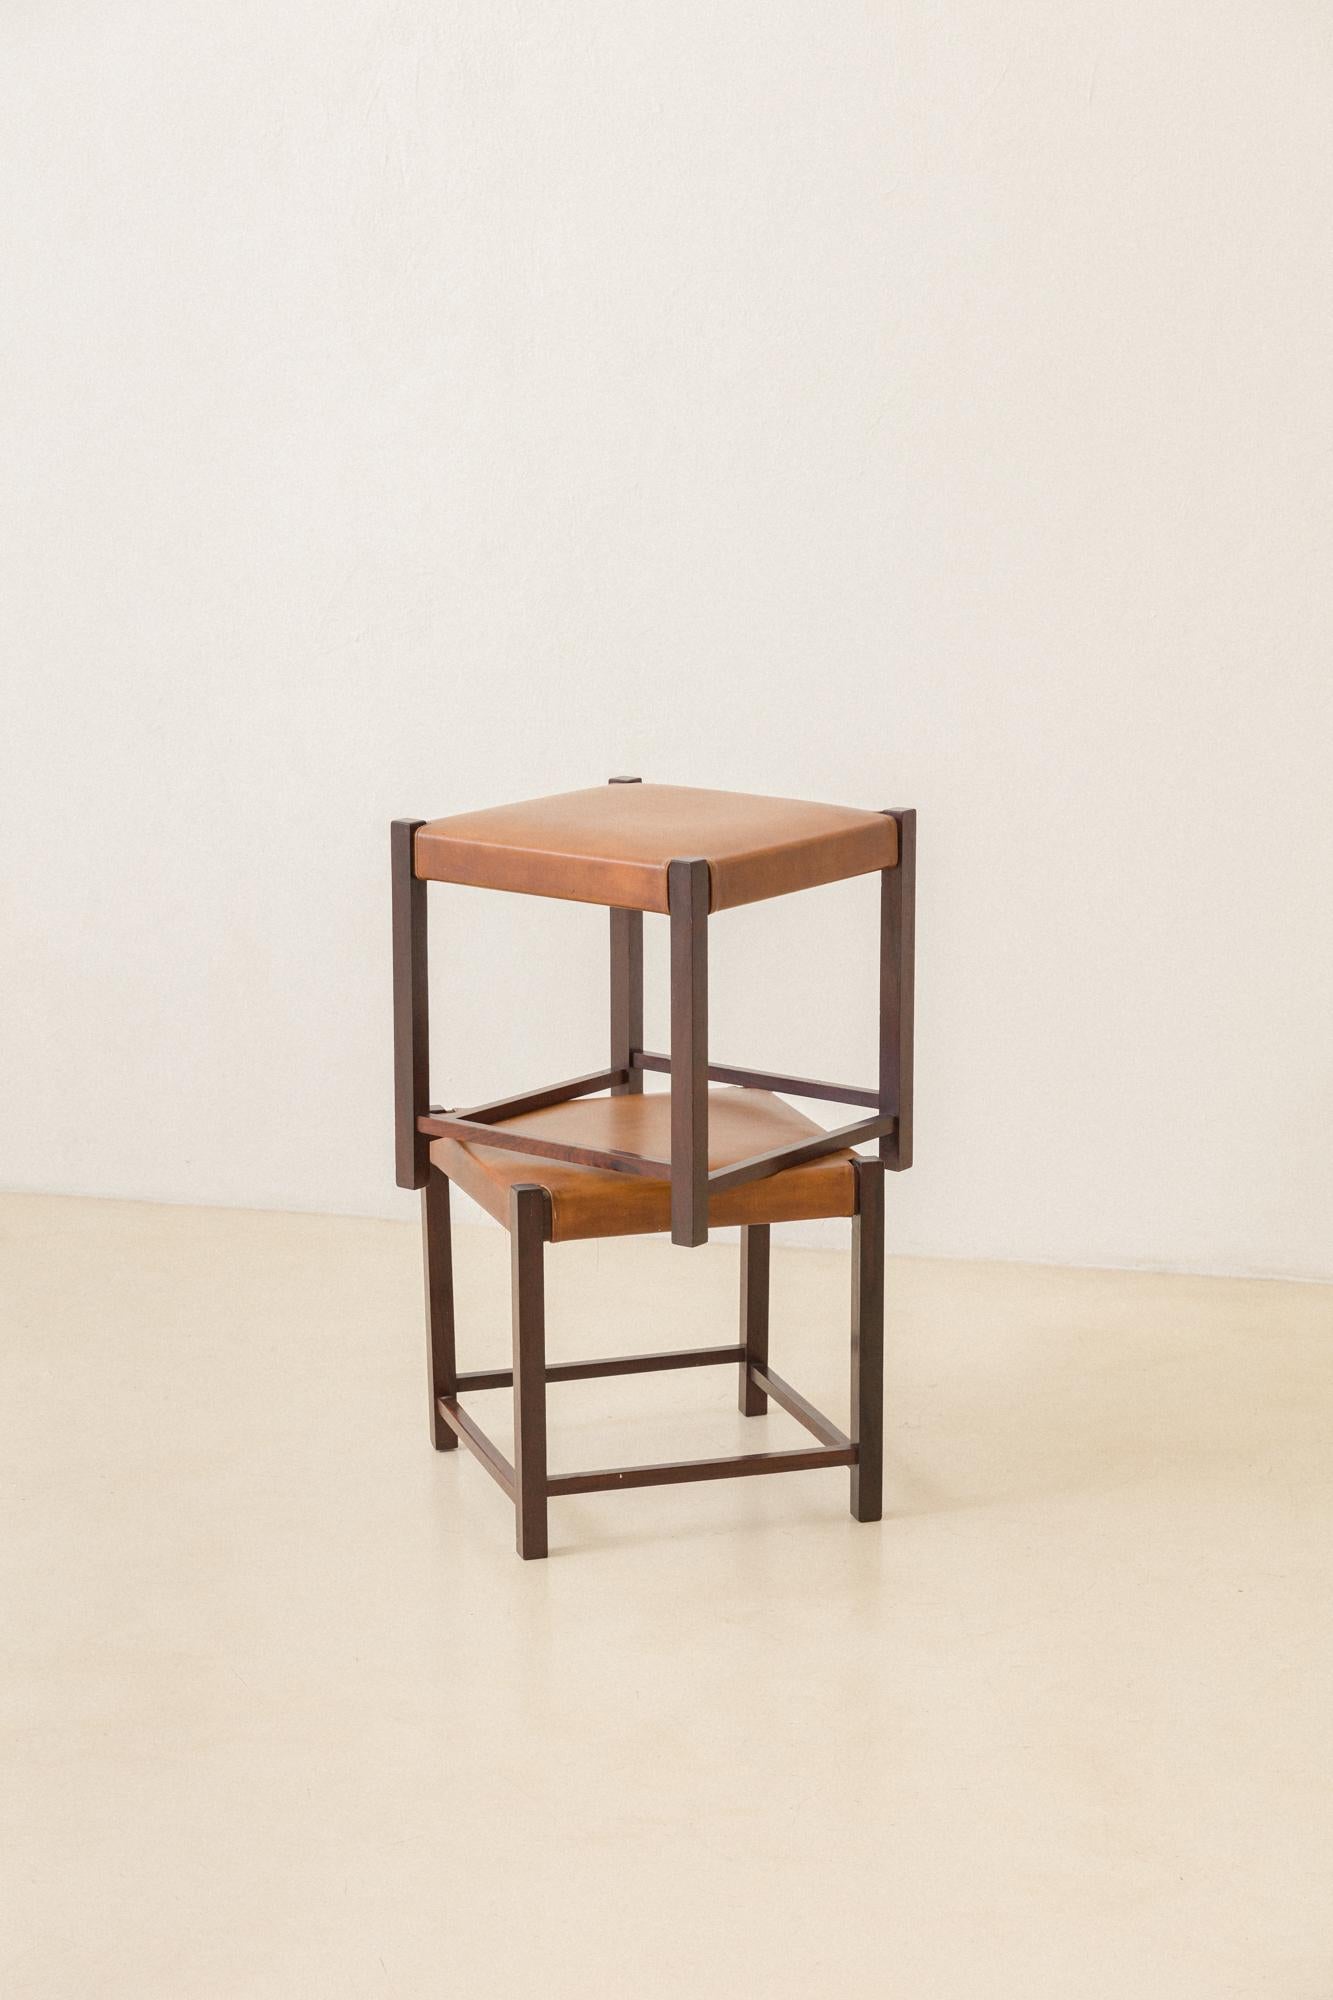 Pair of Brazilian Vintage Rosewood and Leather Stools, Unknown Designer, 1960s For Sale 2